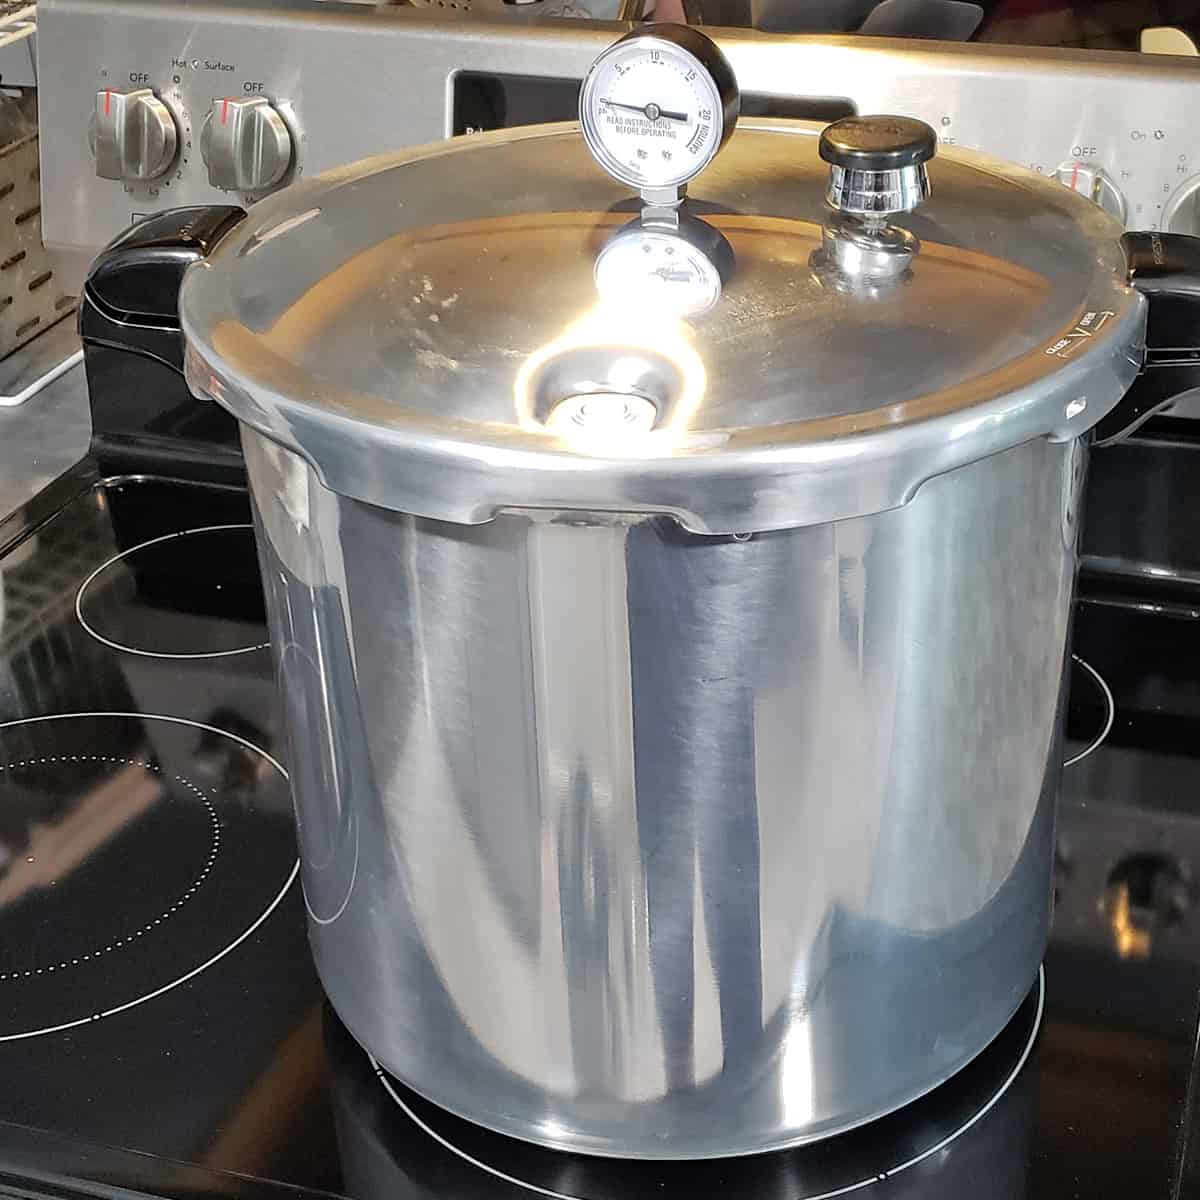 Canning on a Glass Top Stove: Can You Can on a Glass Top Stove?